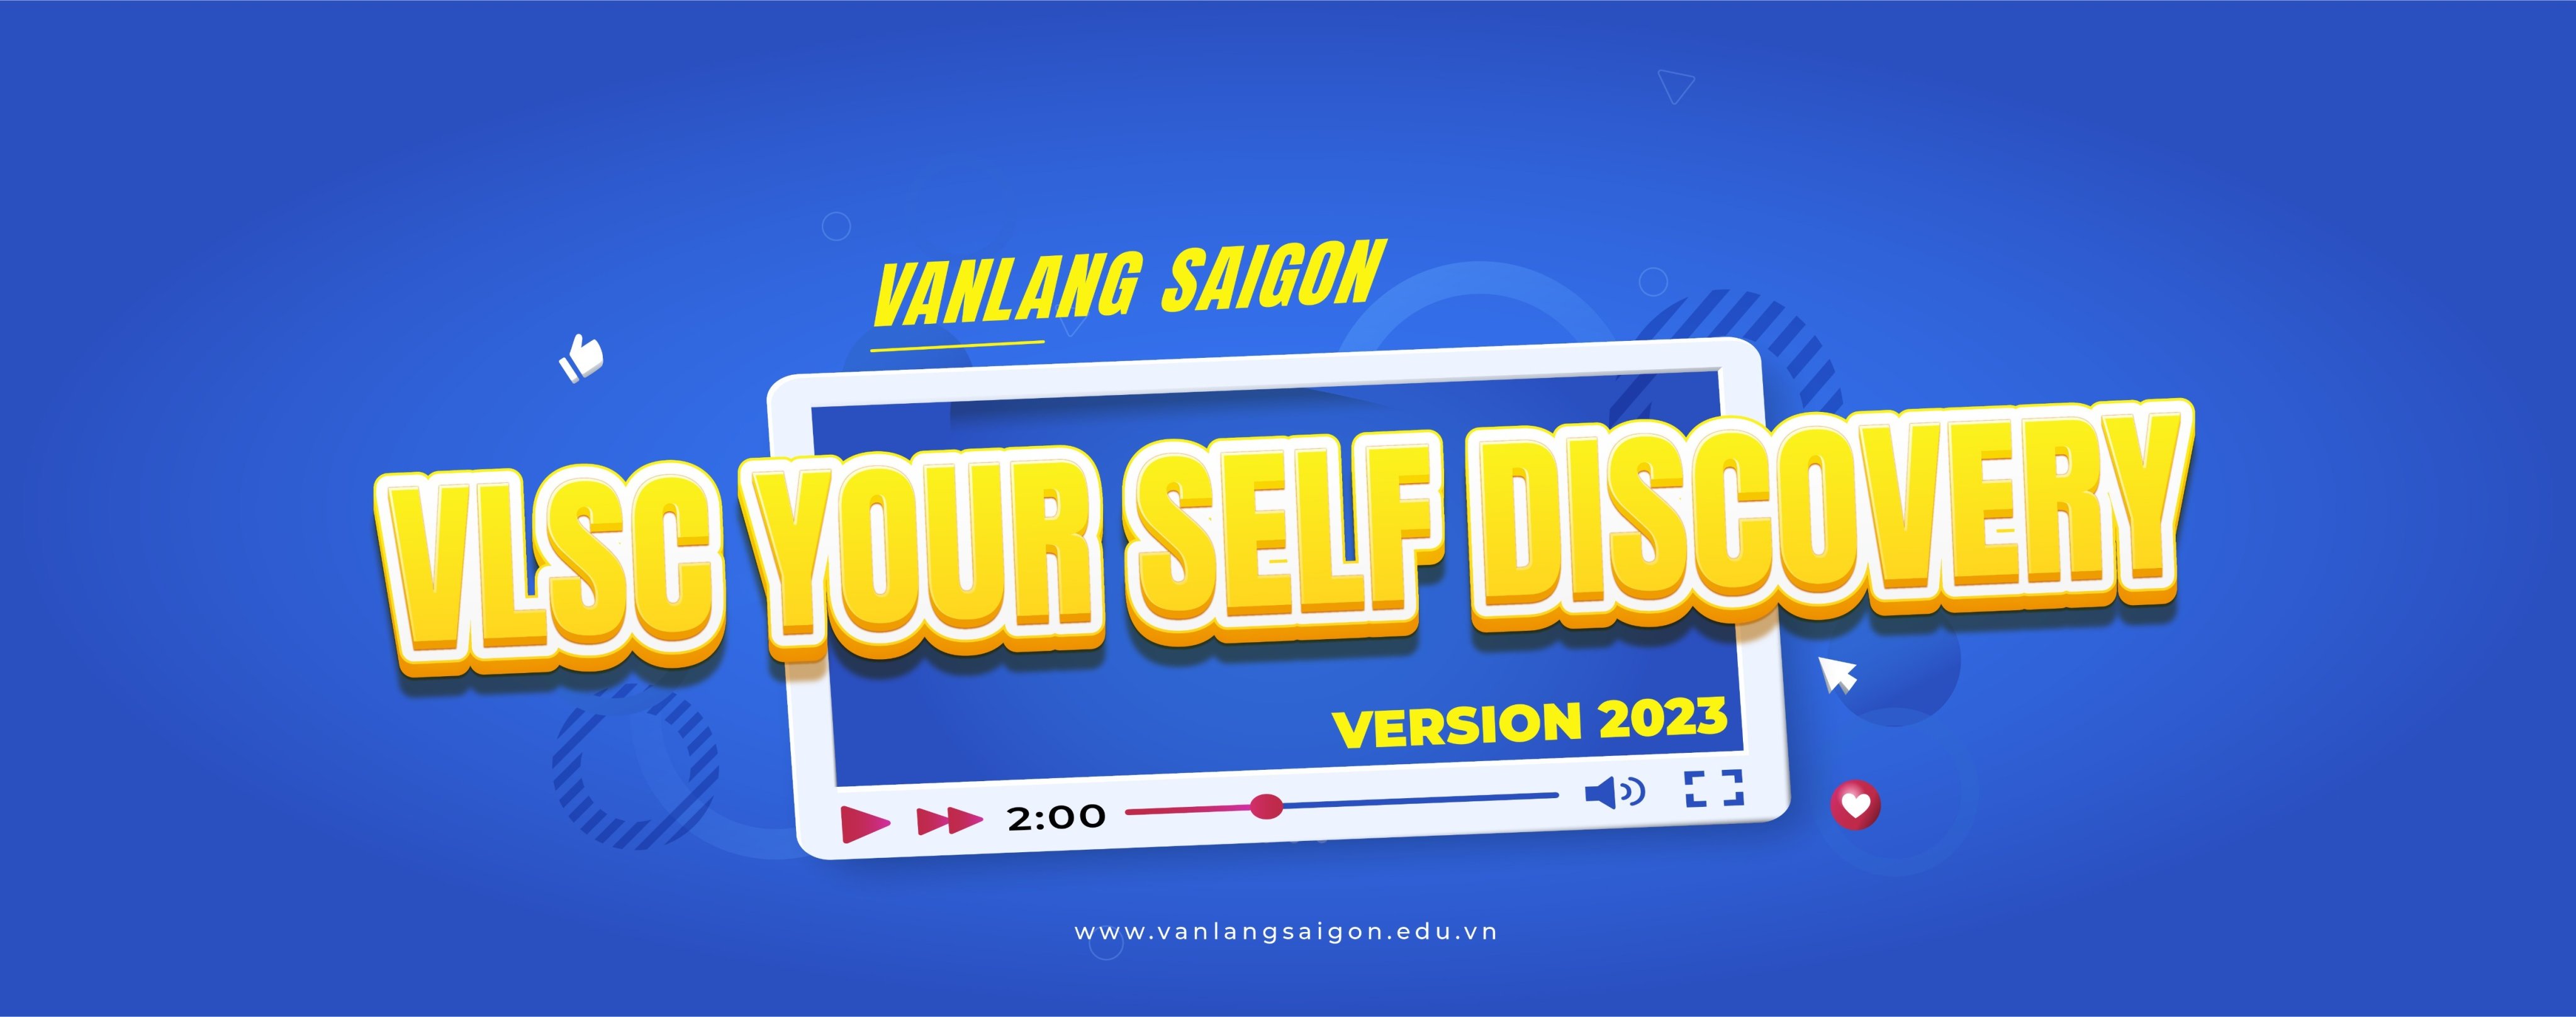 VLSC YOUR SELF - DISCOVERY